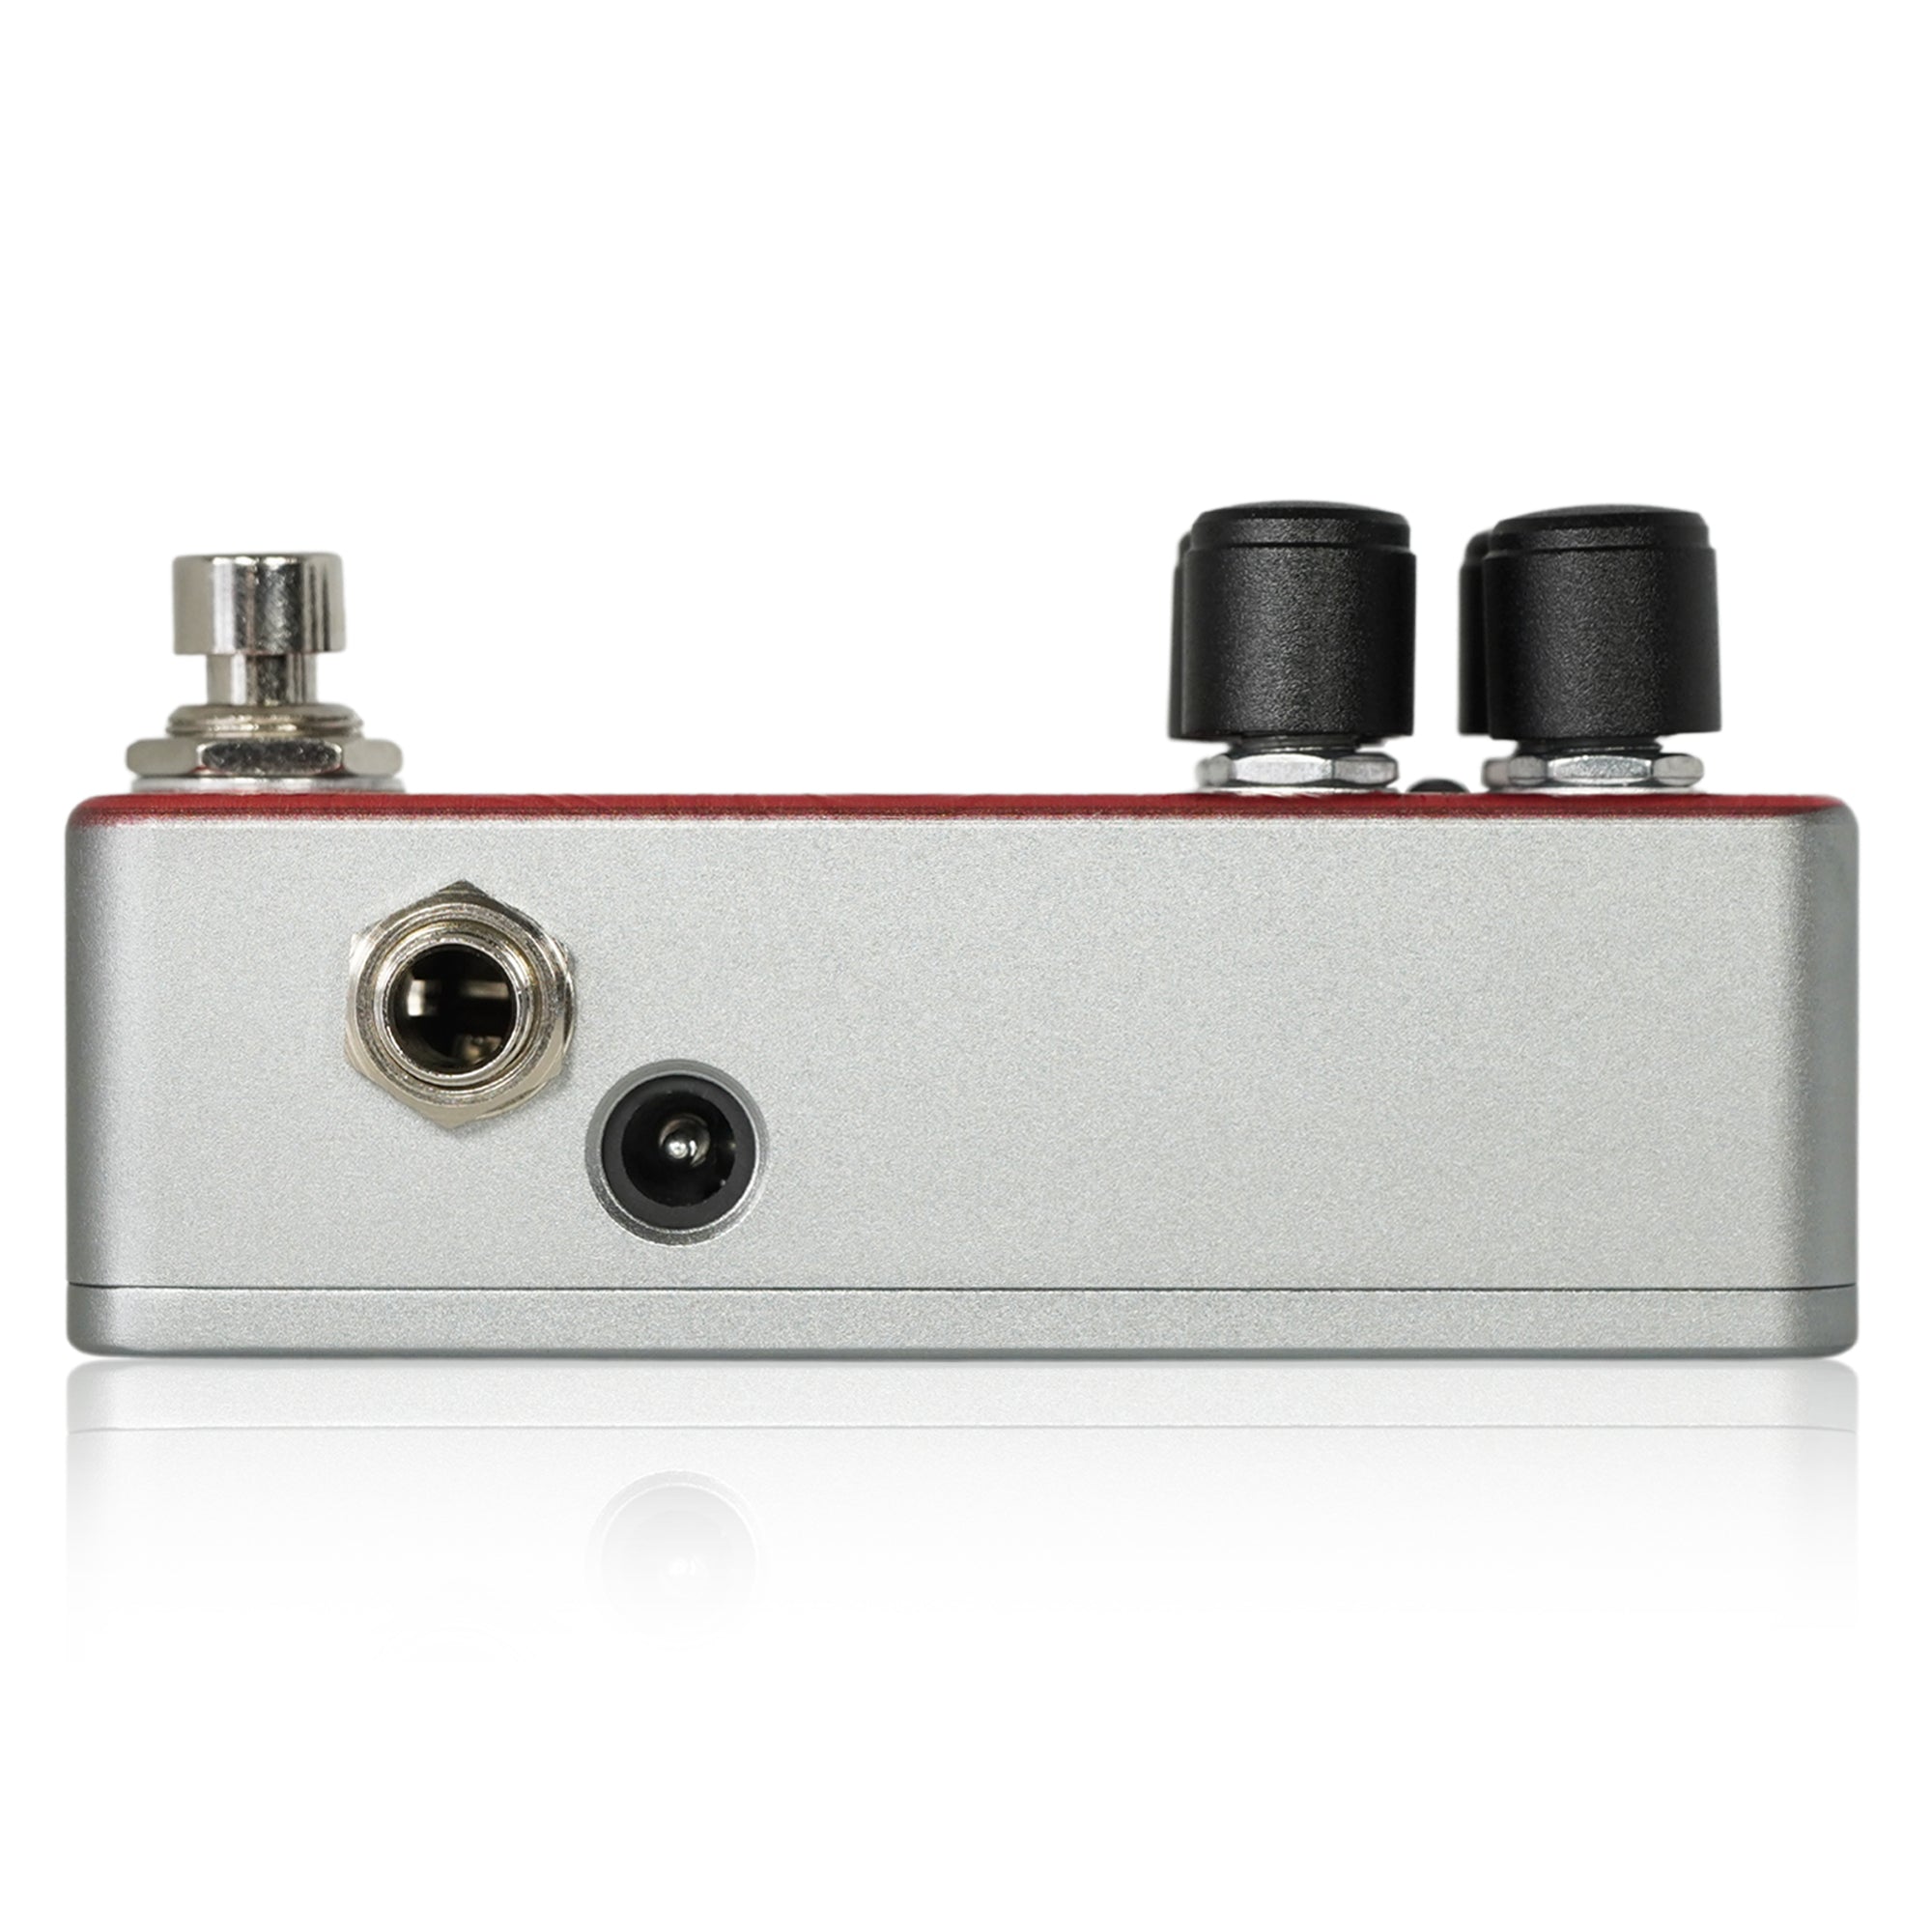 One Control REBEL RED DISTORTION 4K – OneControl